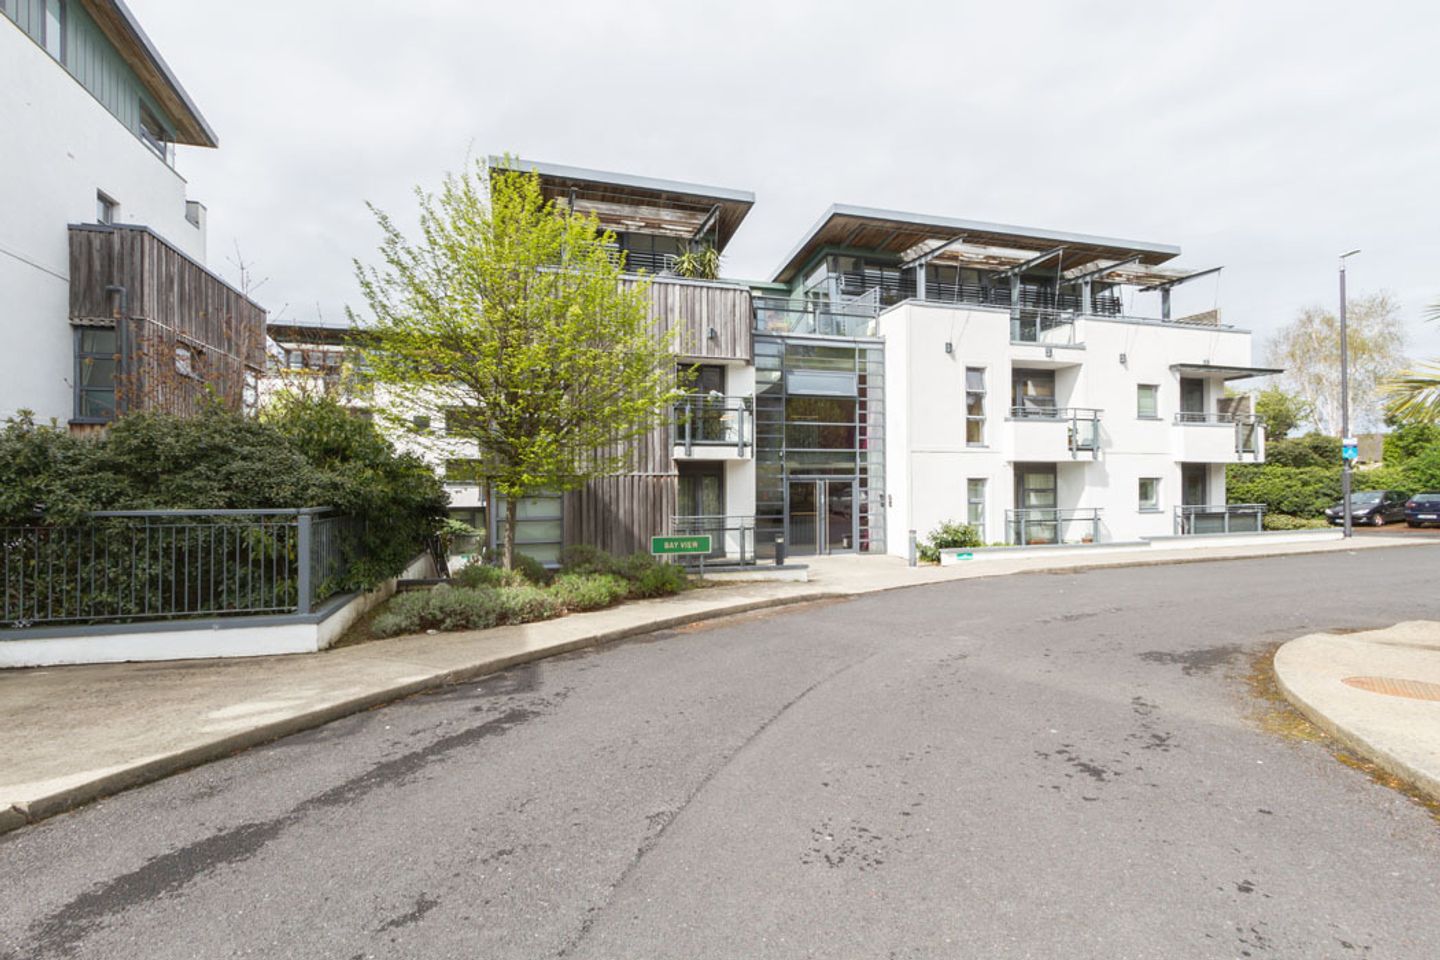 Apartment 7, Bay View, Headlands, Bray, Co. Wicklow, A98XY97